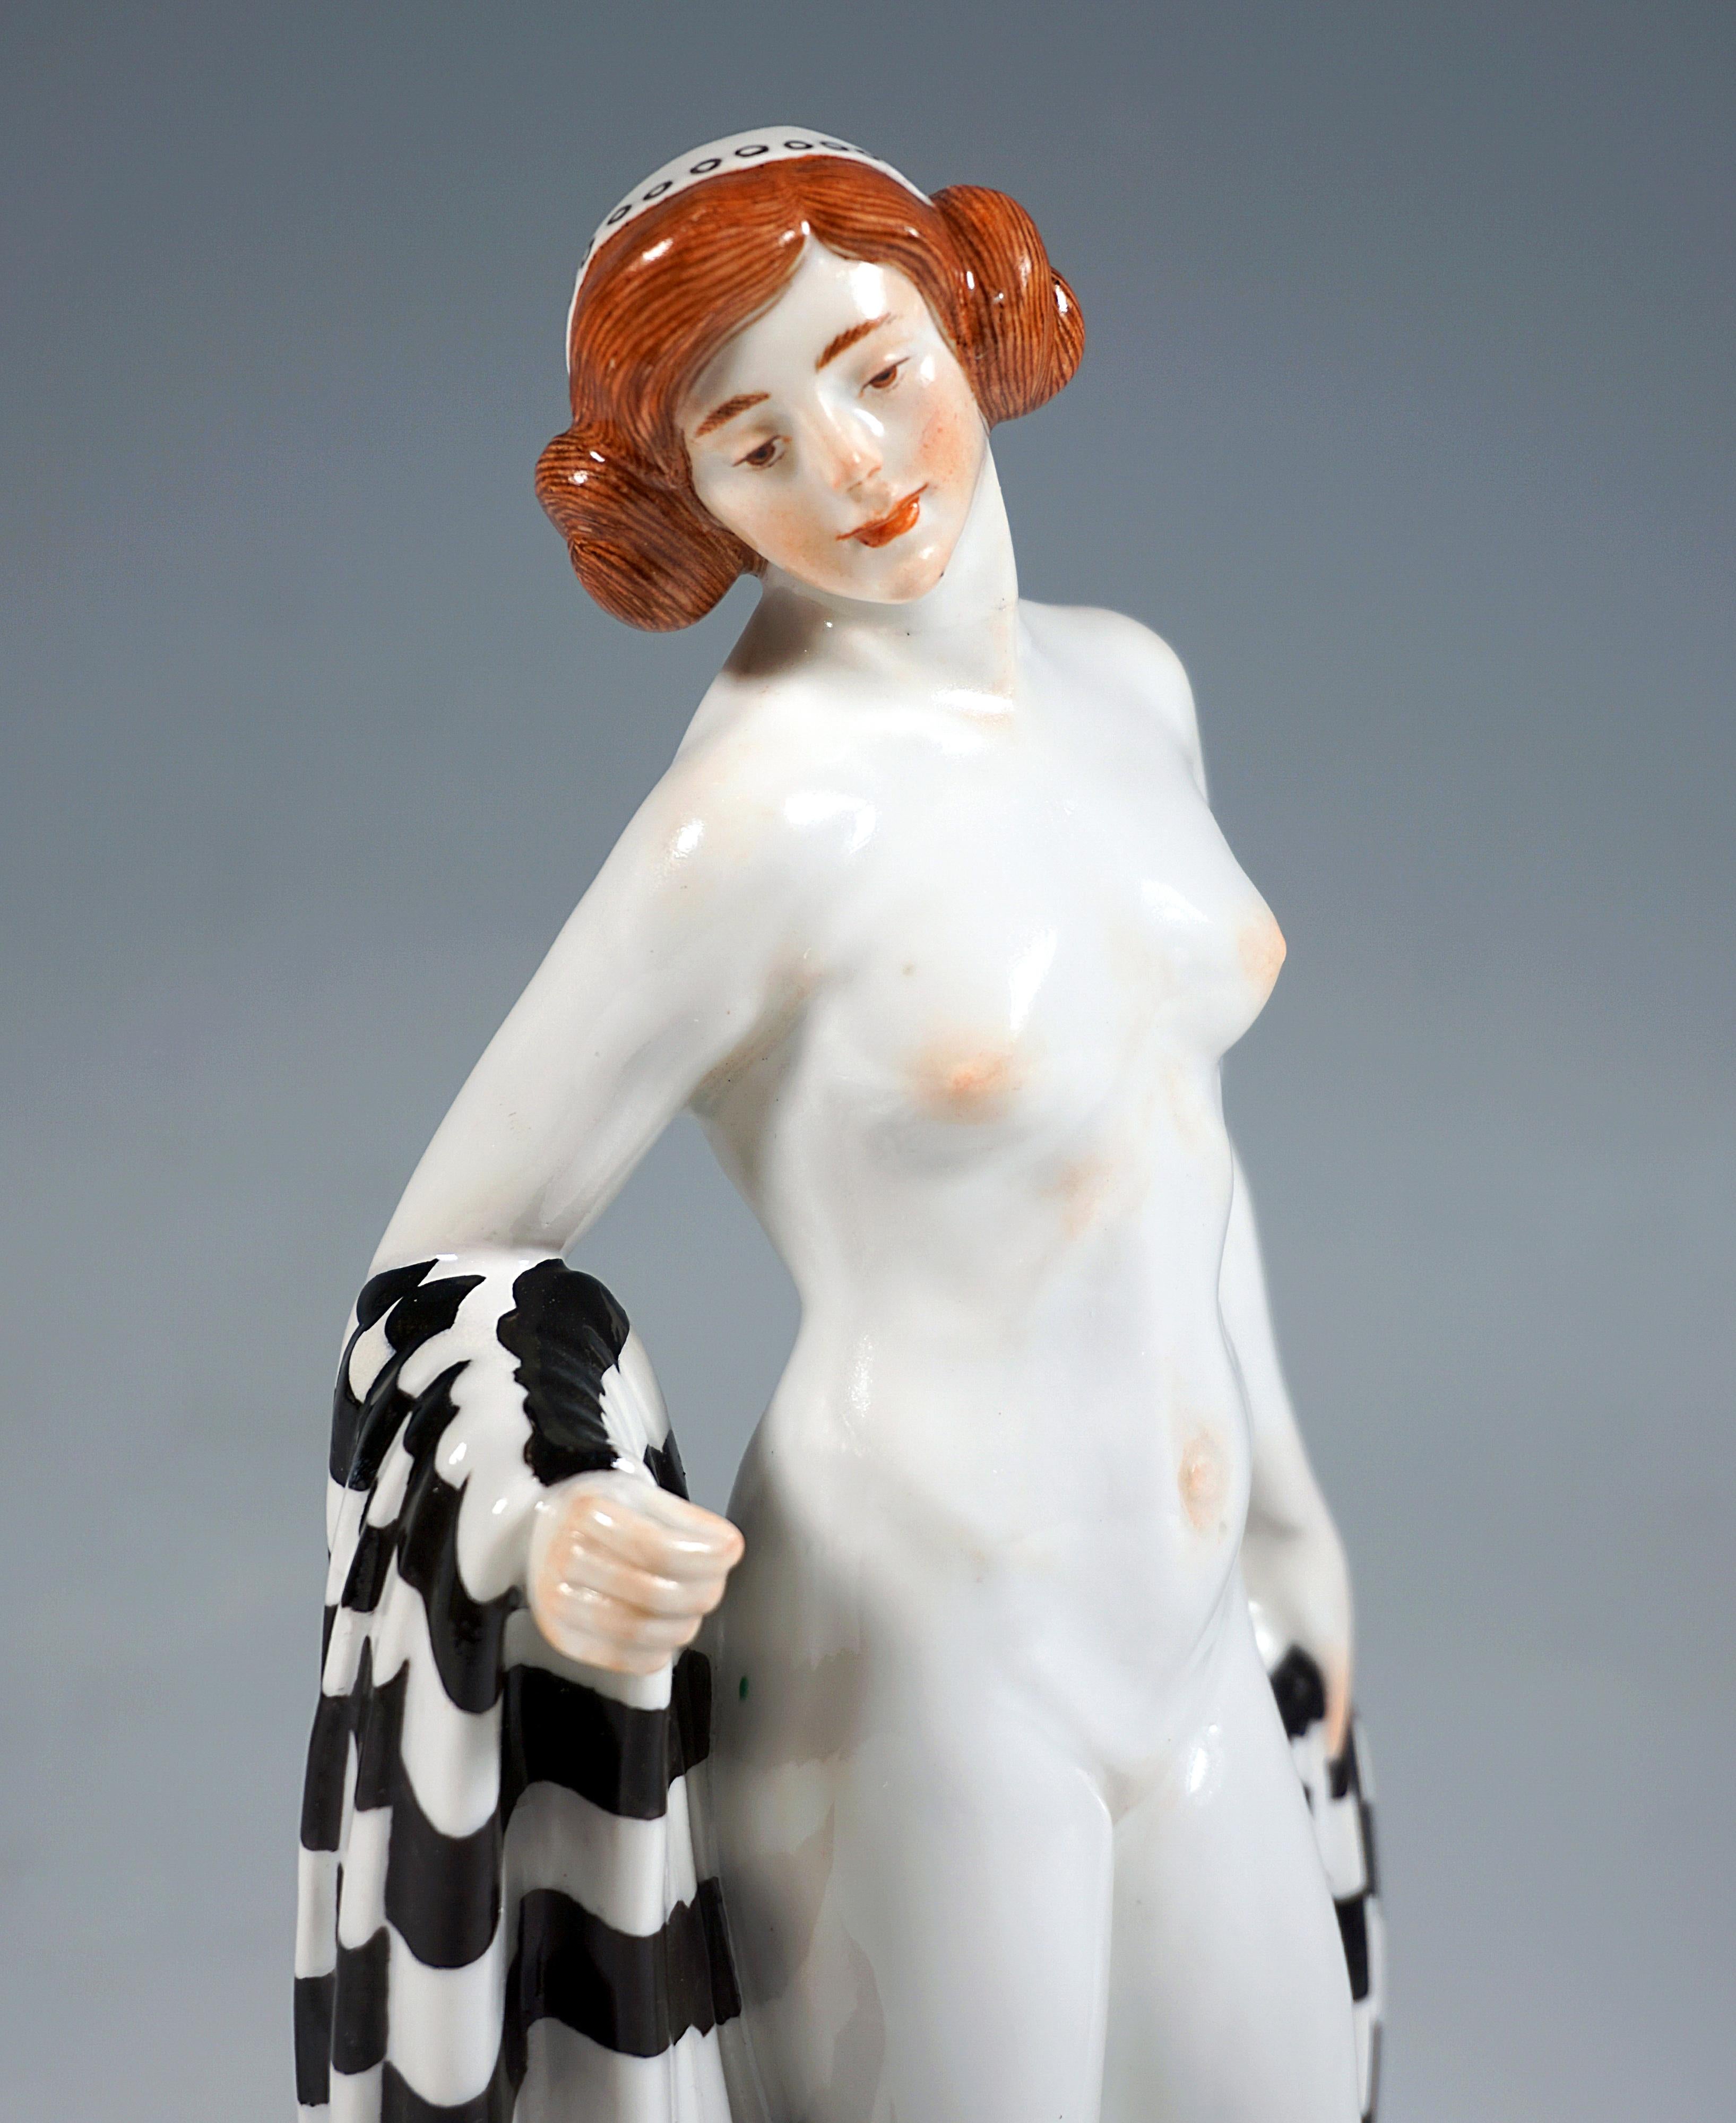 Early 20th Century Meissen Germany Art Nouveau Figurine Girl With Shawl, by Theodor Eichler, c 1913 For Sale